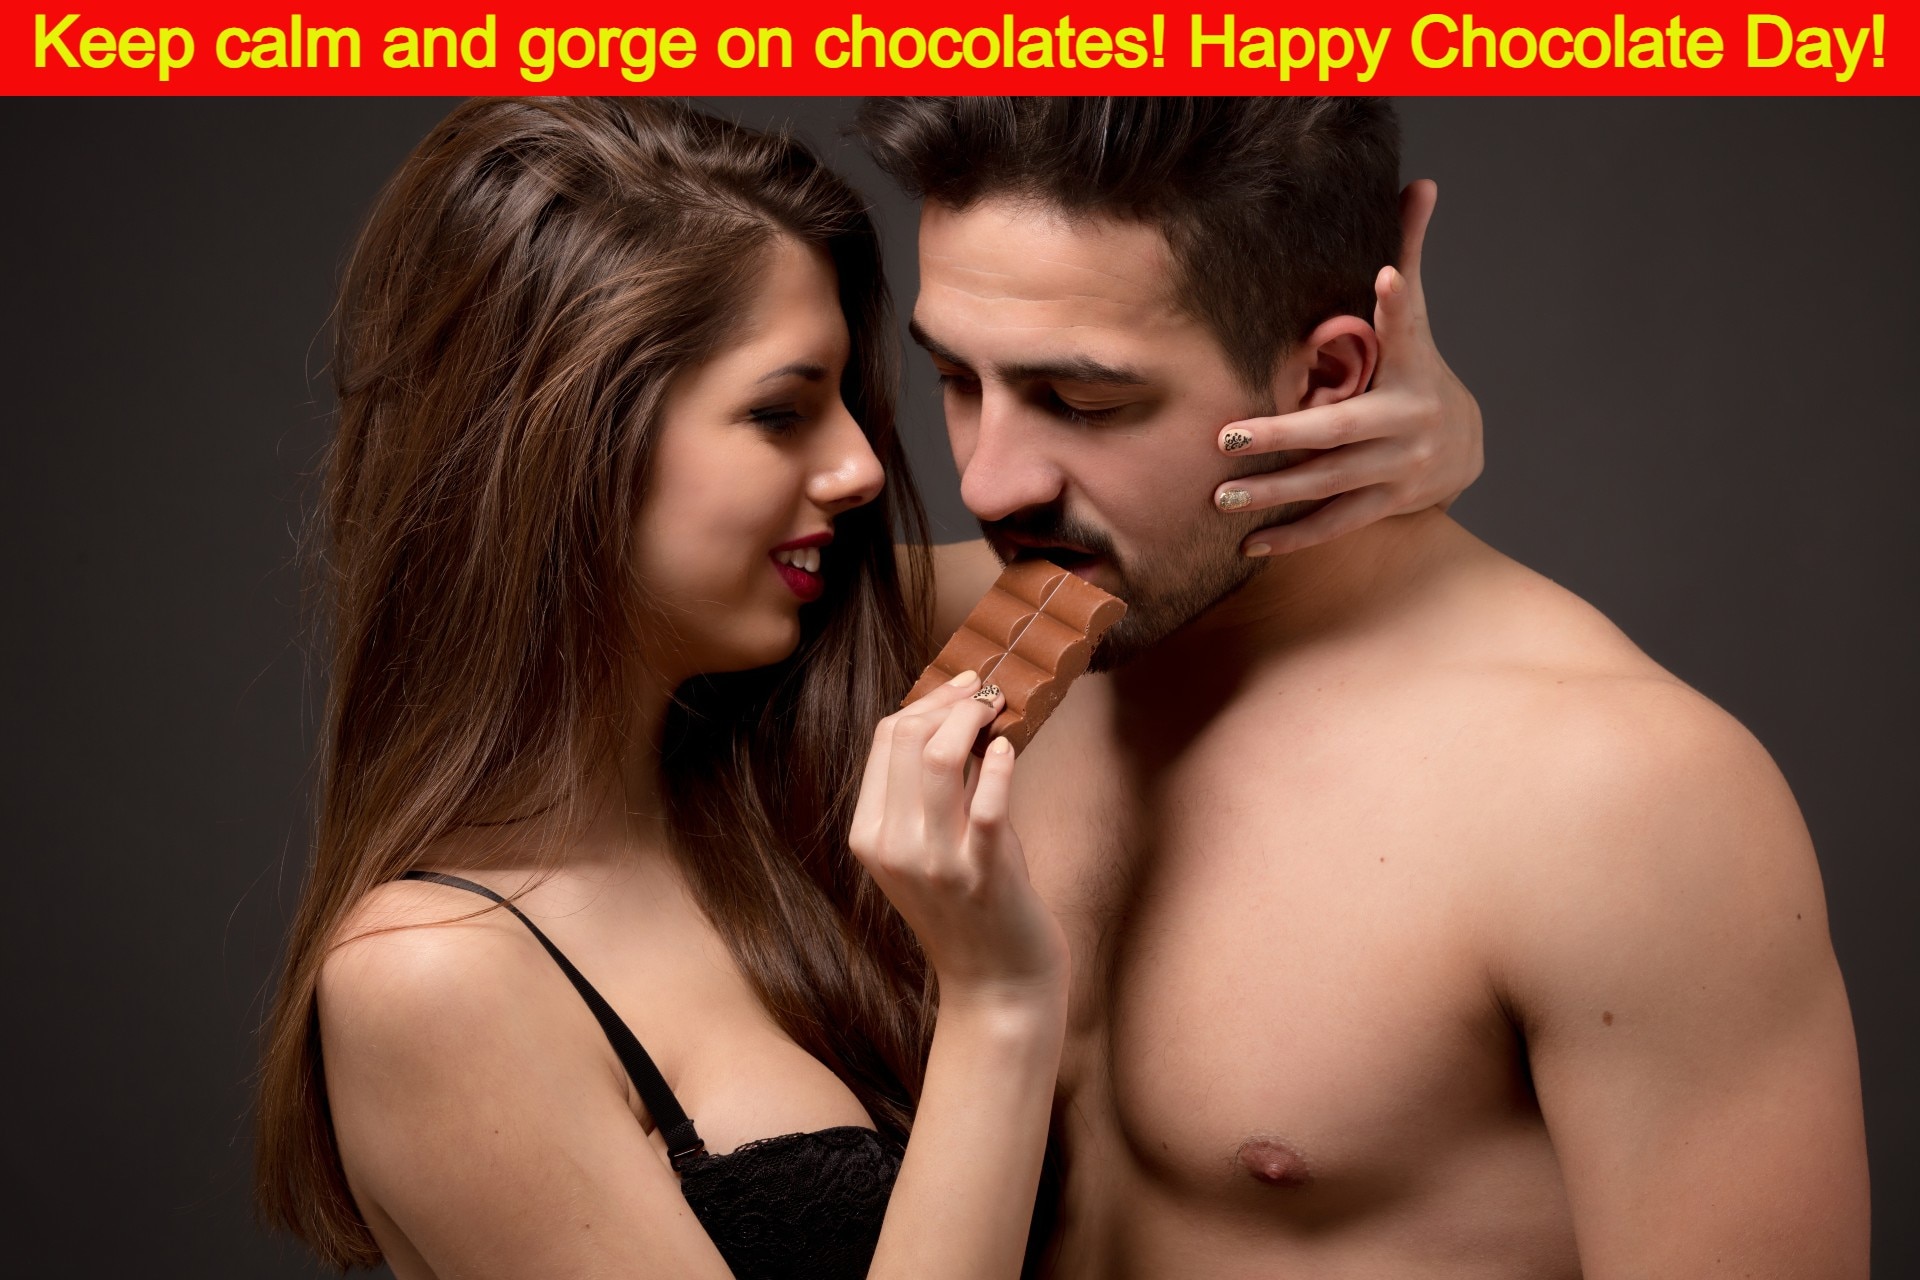 Happy Chocolate Day 2022: Wishes Images, Quotes, Photos, Pics, Facebook SMS and Messages to share with your loved ones. (Image: Shutterstock)